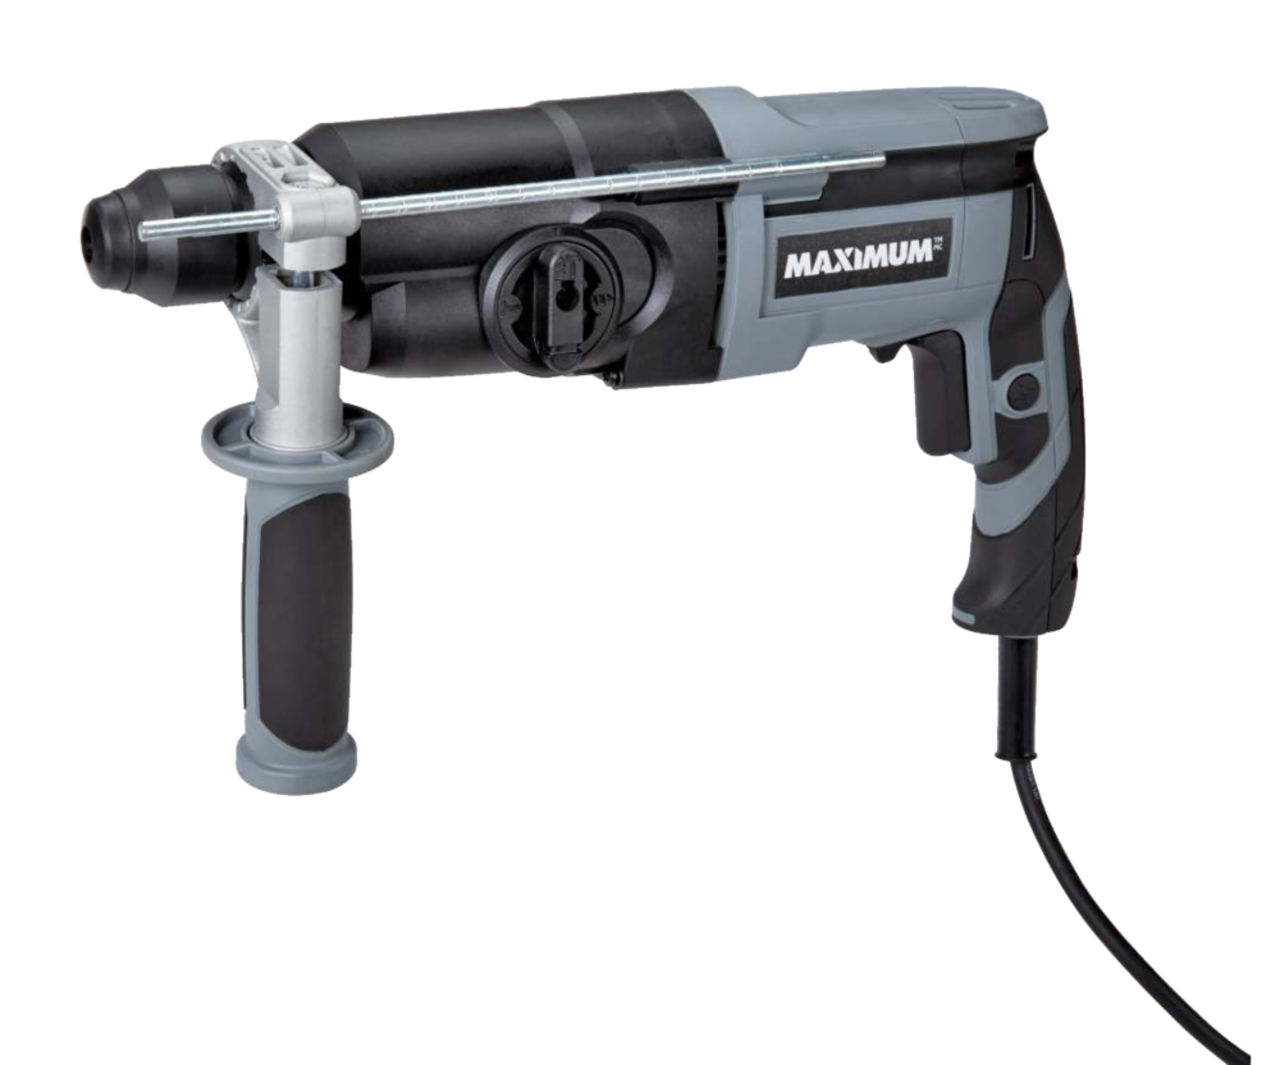 https://media-www.canadiantire.ca/product/fixing/tools/portable-power-tools/0542092/maximum-5-8-rotary-hammer-drill-edec5895-9ad7-46ec-bce0-82d32789c407.png?imdensity=1&imwidth=1244&impolicy=mZoom